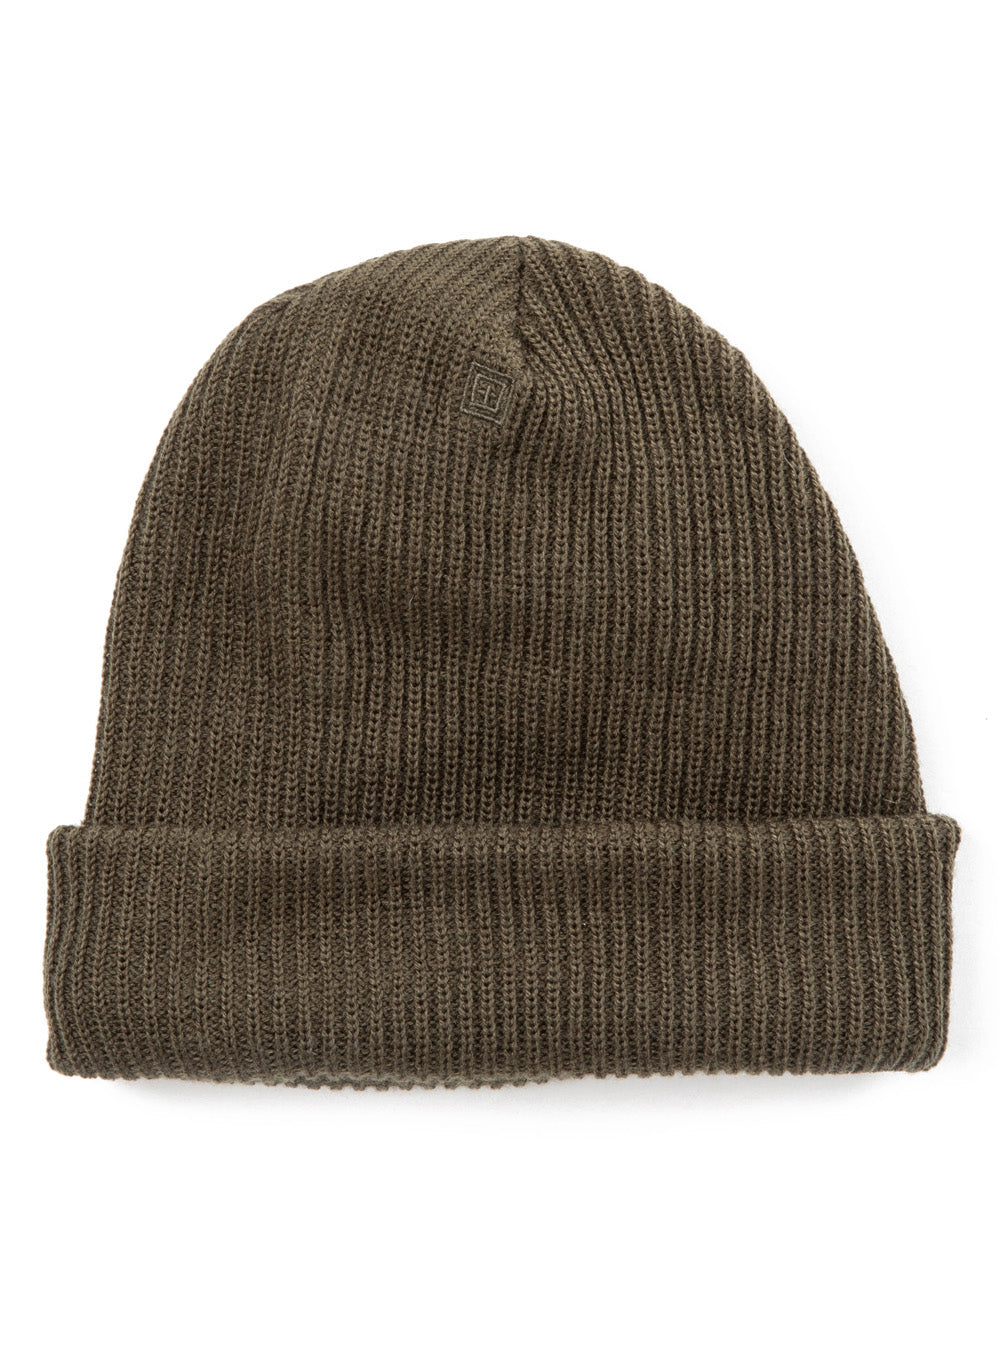 5.11 Tactical Rover Beanie - Unisex - TacSource